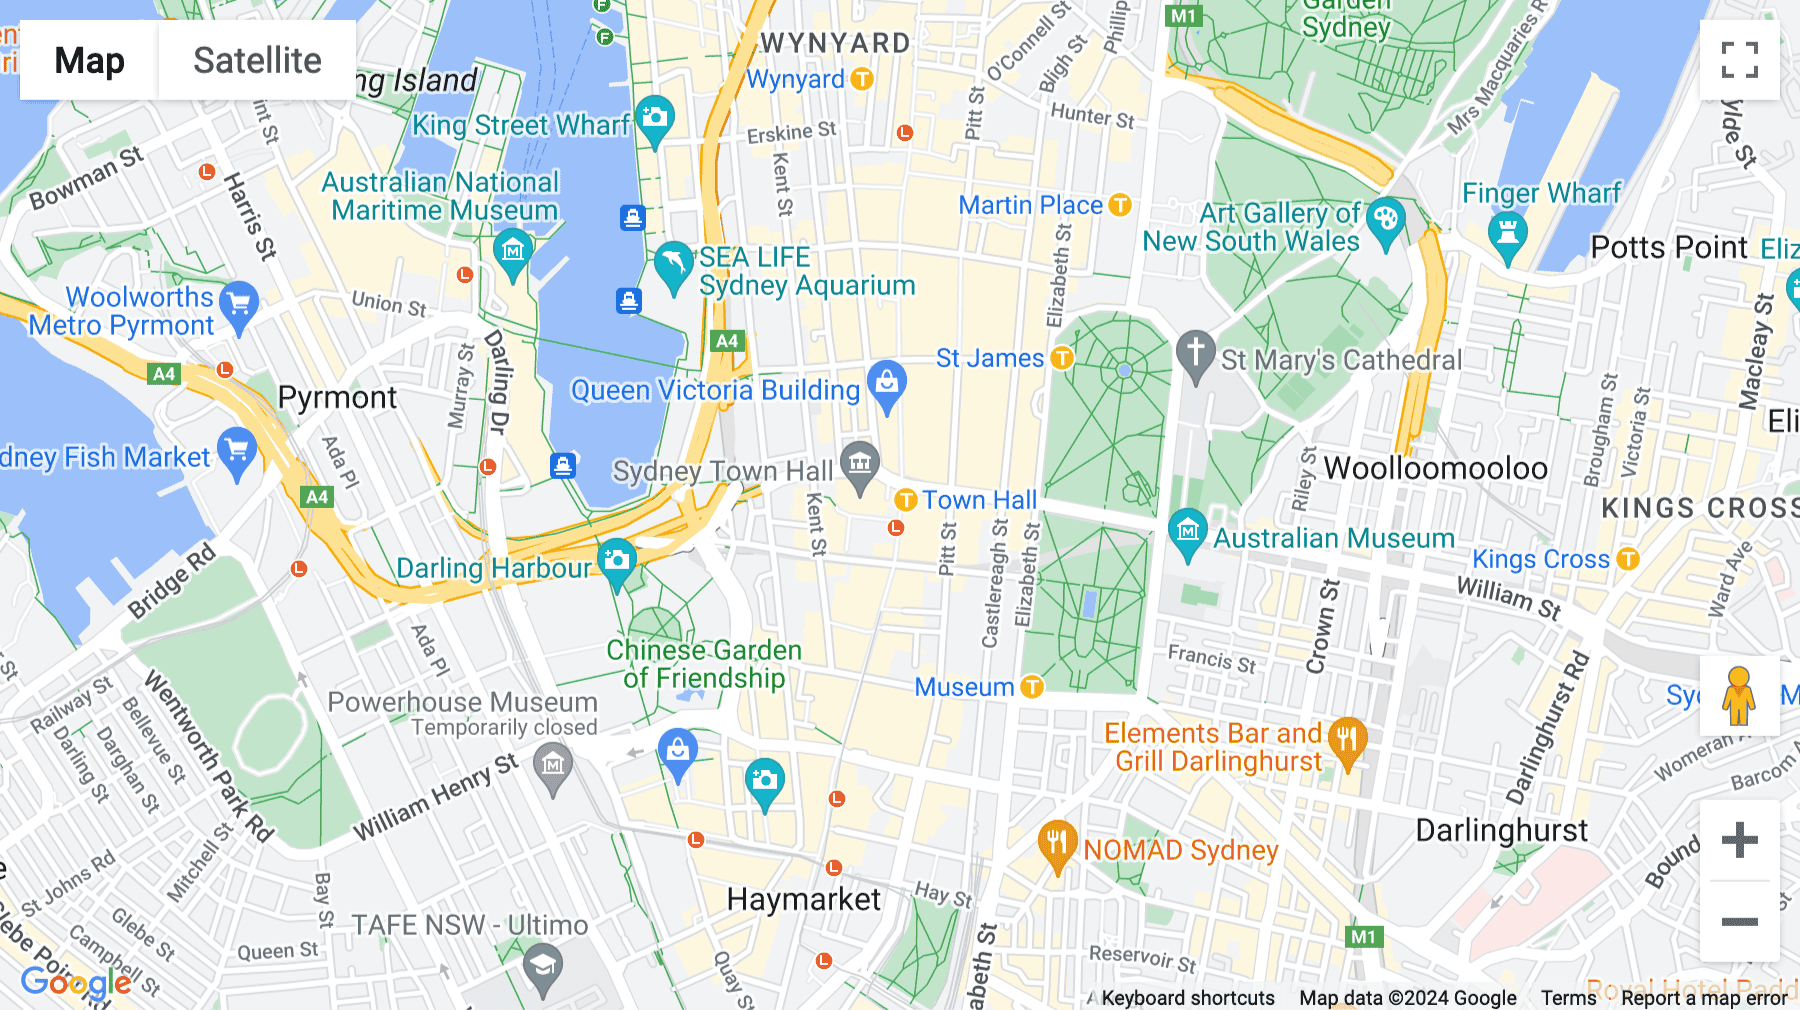 Click for interative map of 476-478 George Street, Sydney, New South Wales, Australia, Sydney